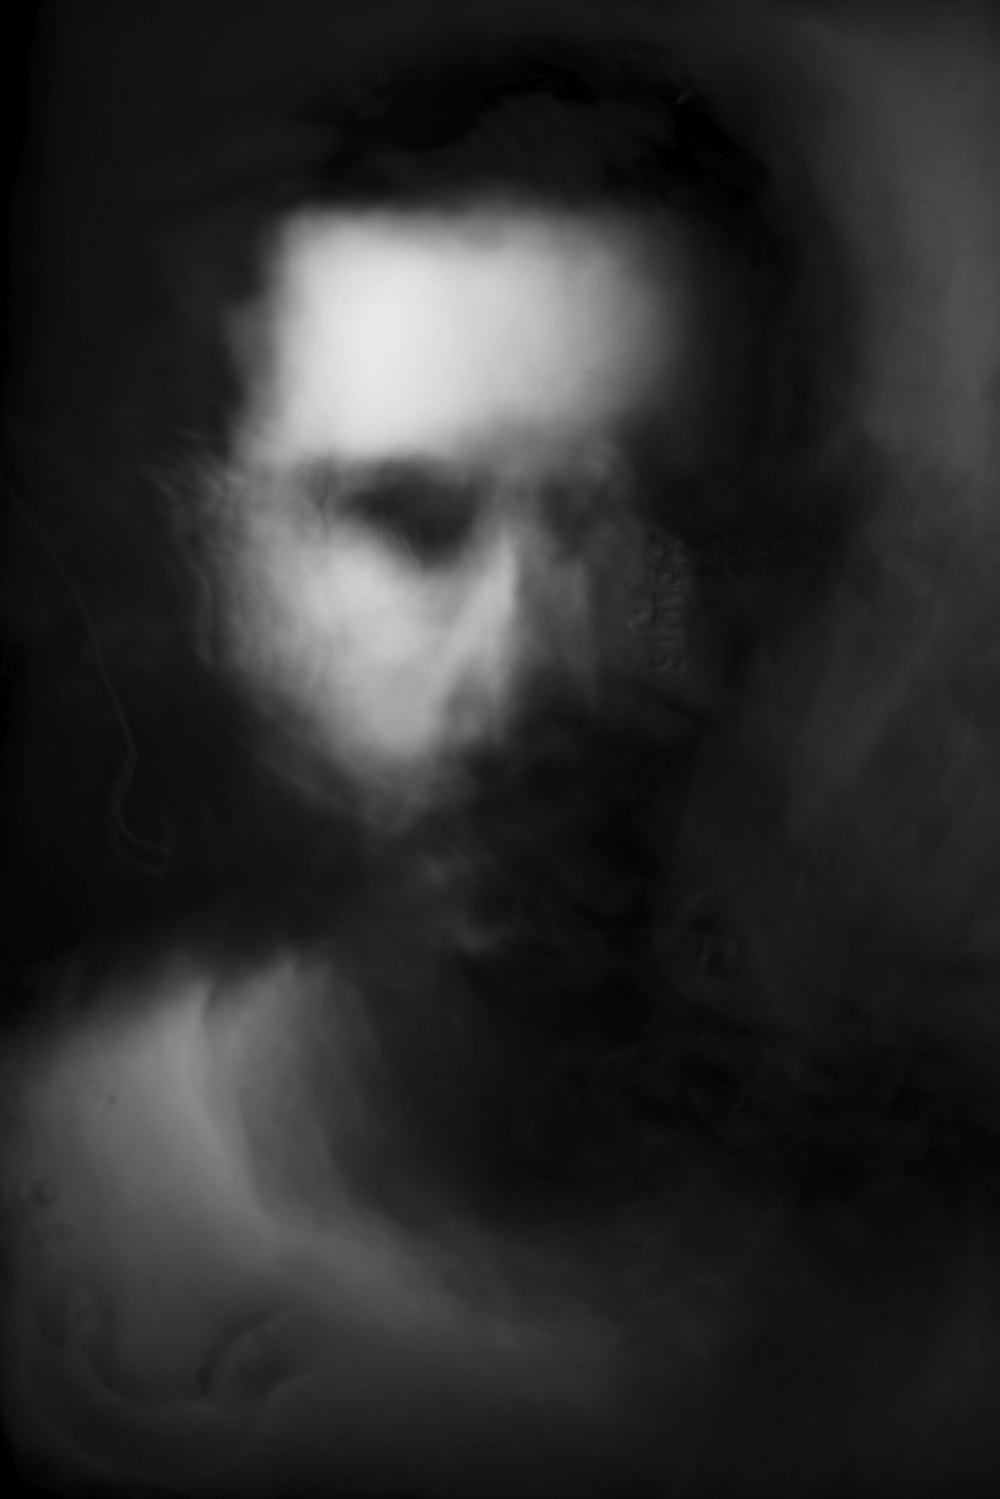 a blurry image of a person